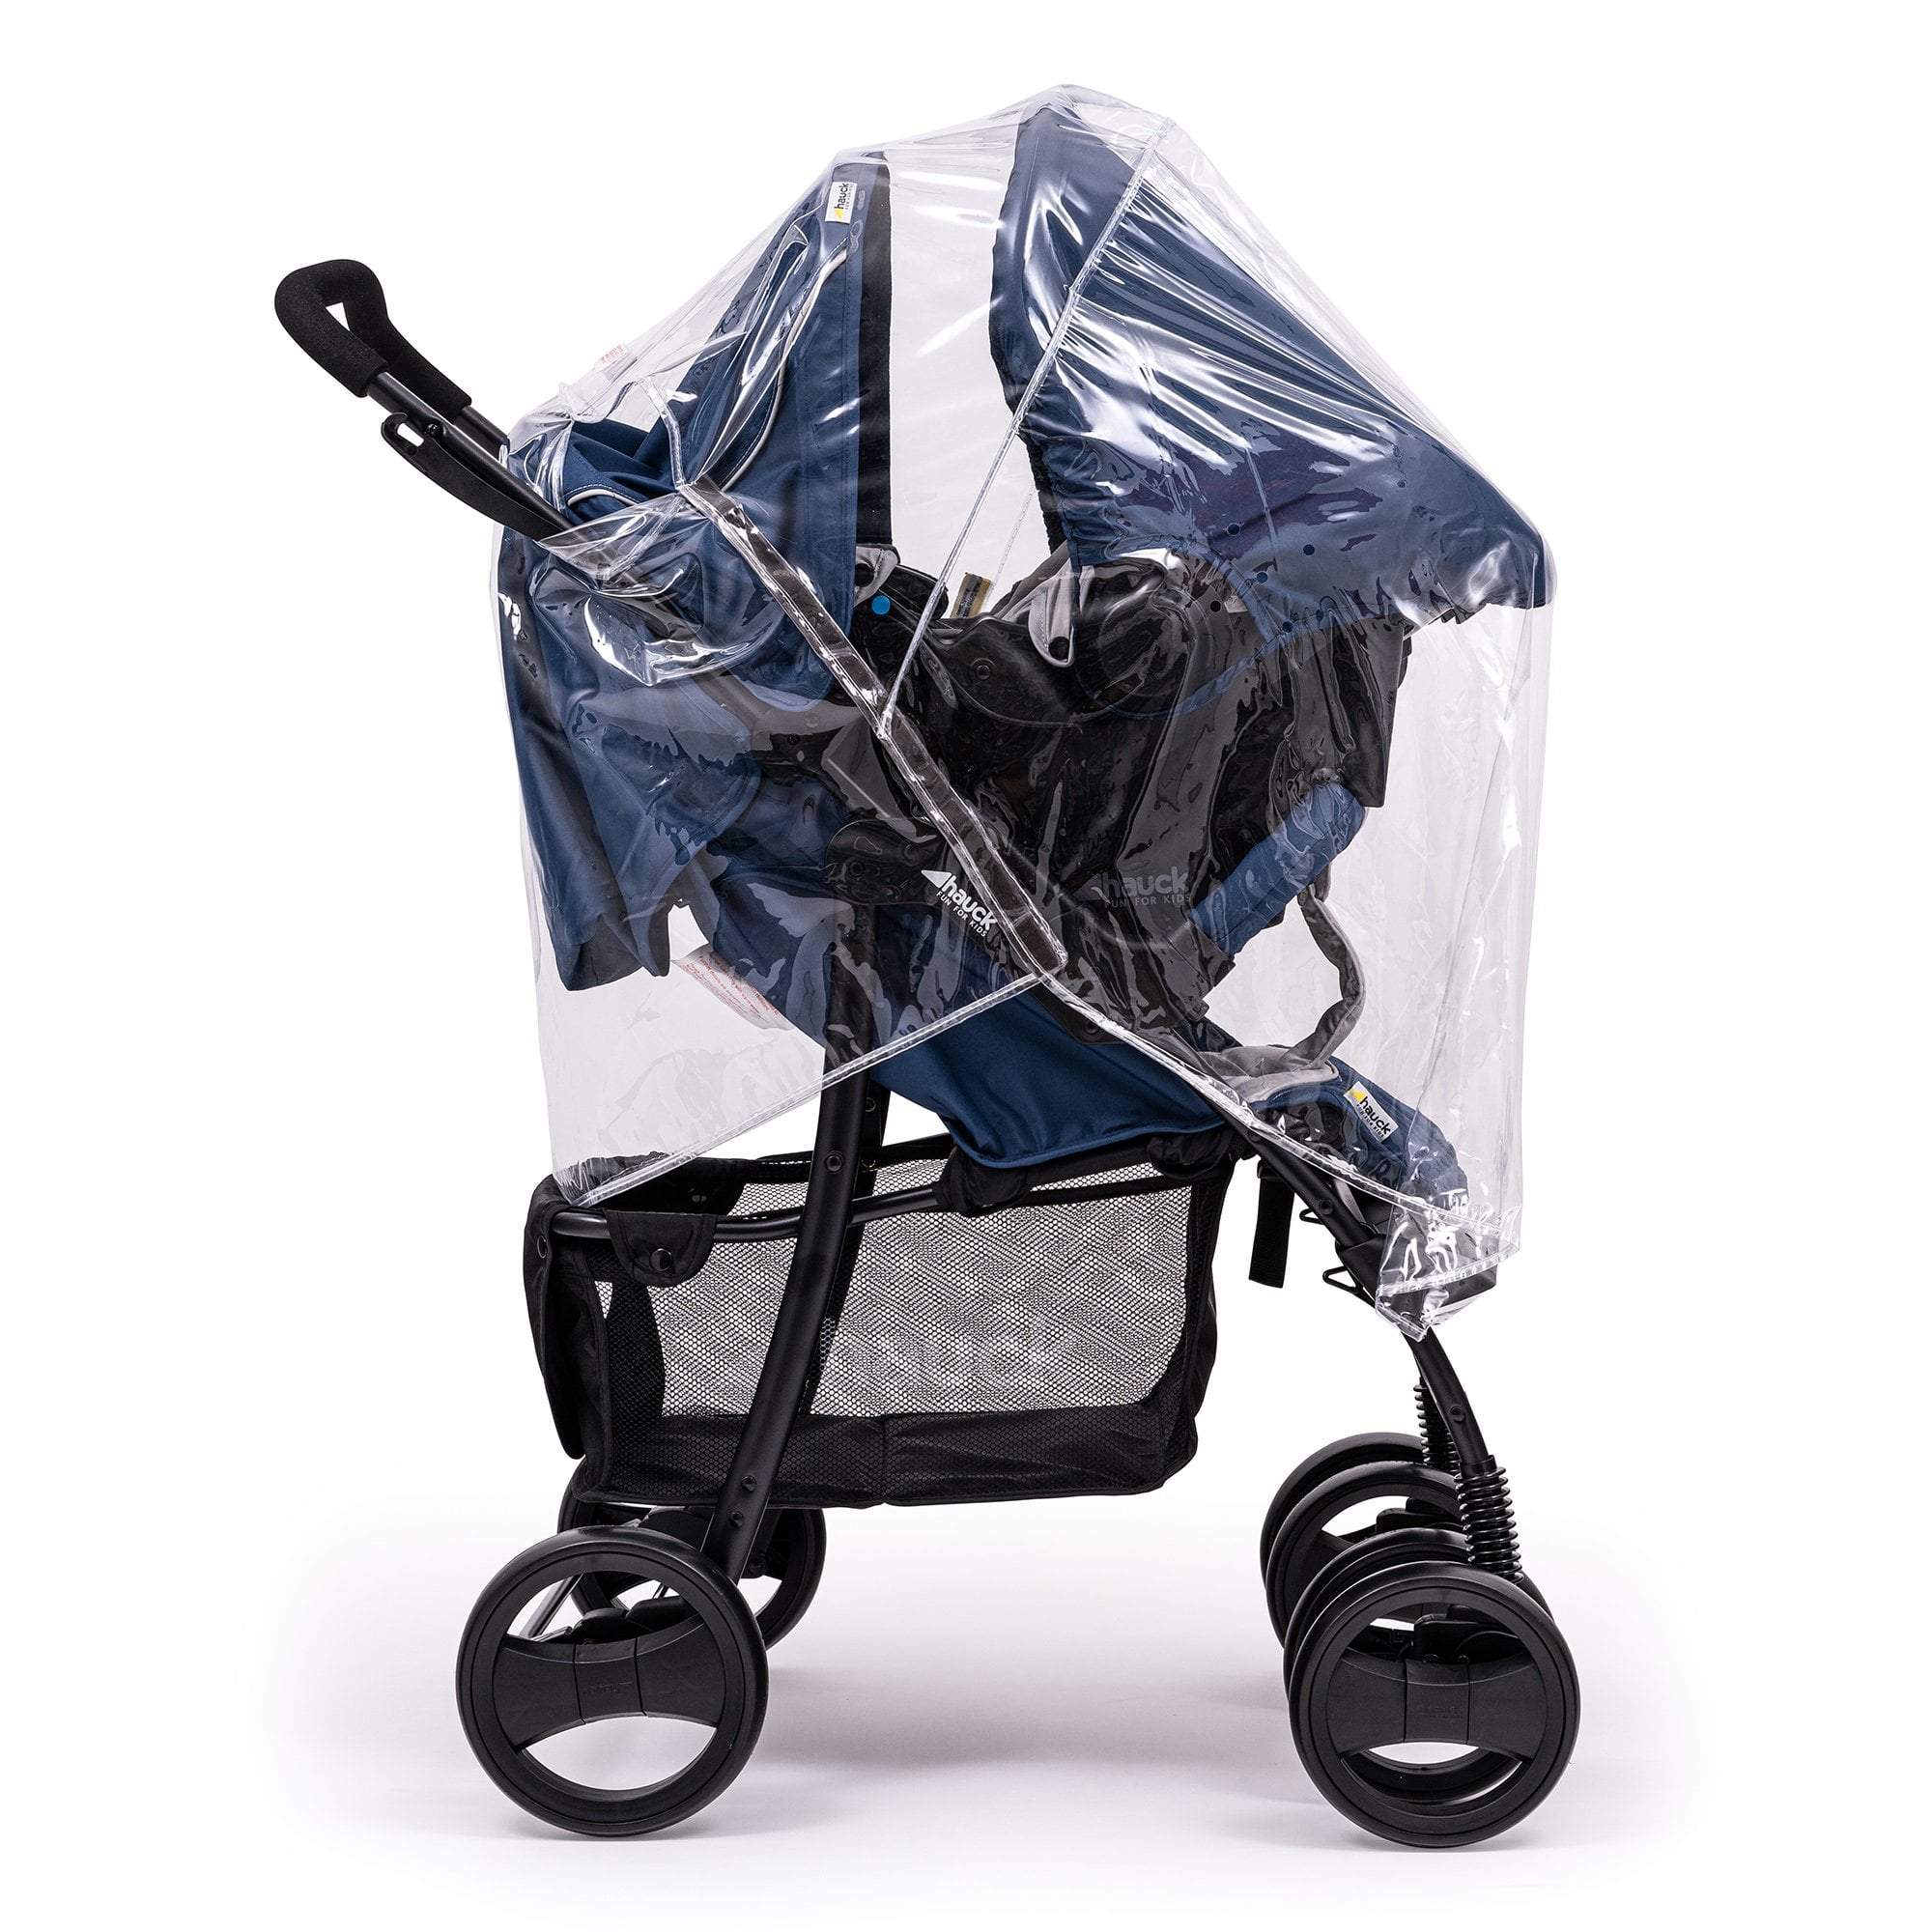 Travel System Raincover Compatible with Kiddicouture - Fits All Models -  | For Your Little One